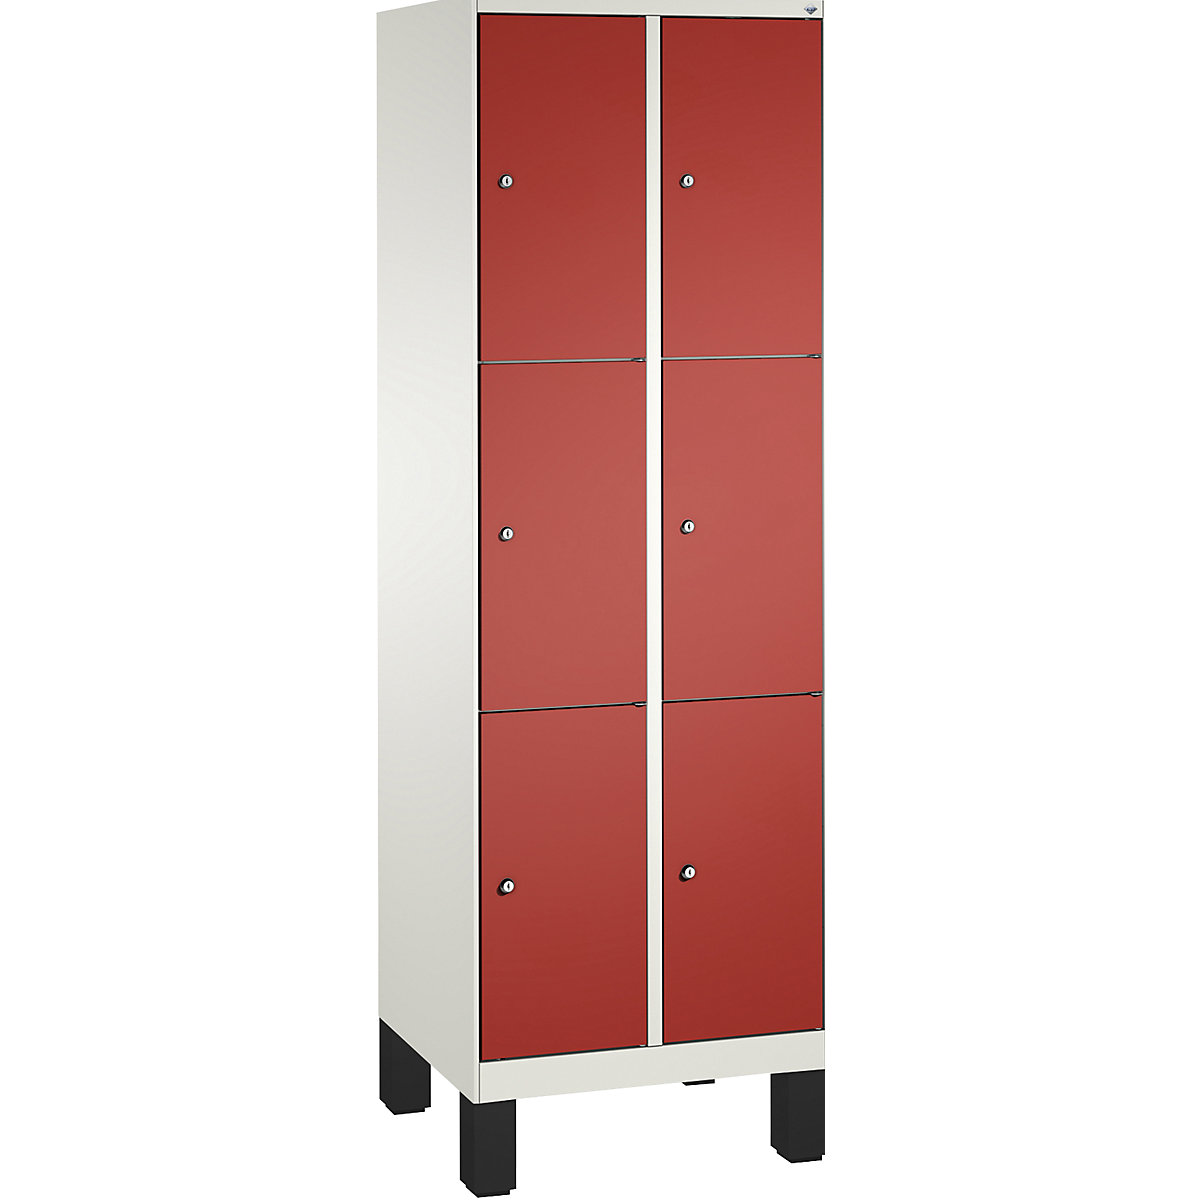 EVOLO locker unit, with feet – C+P, 2 compartments, 3 shelf compartments each, compartment width 300 mm, traffic white / flame red-12